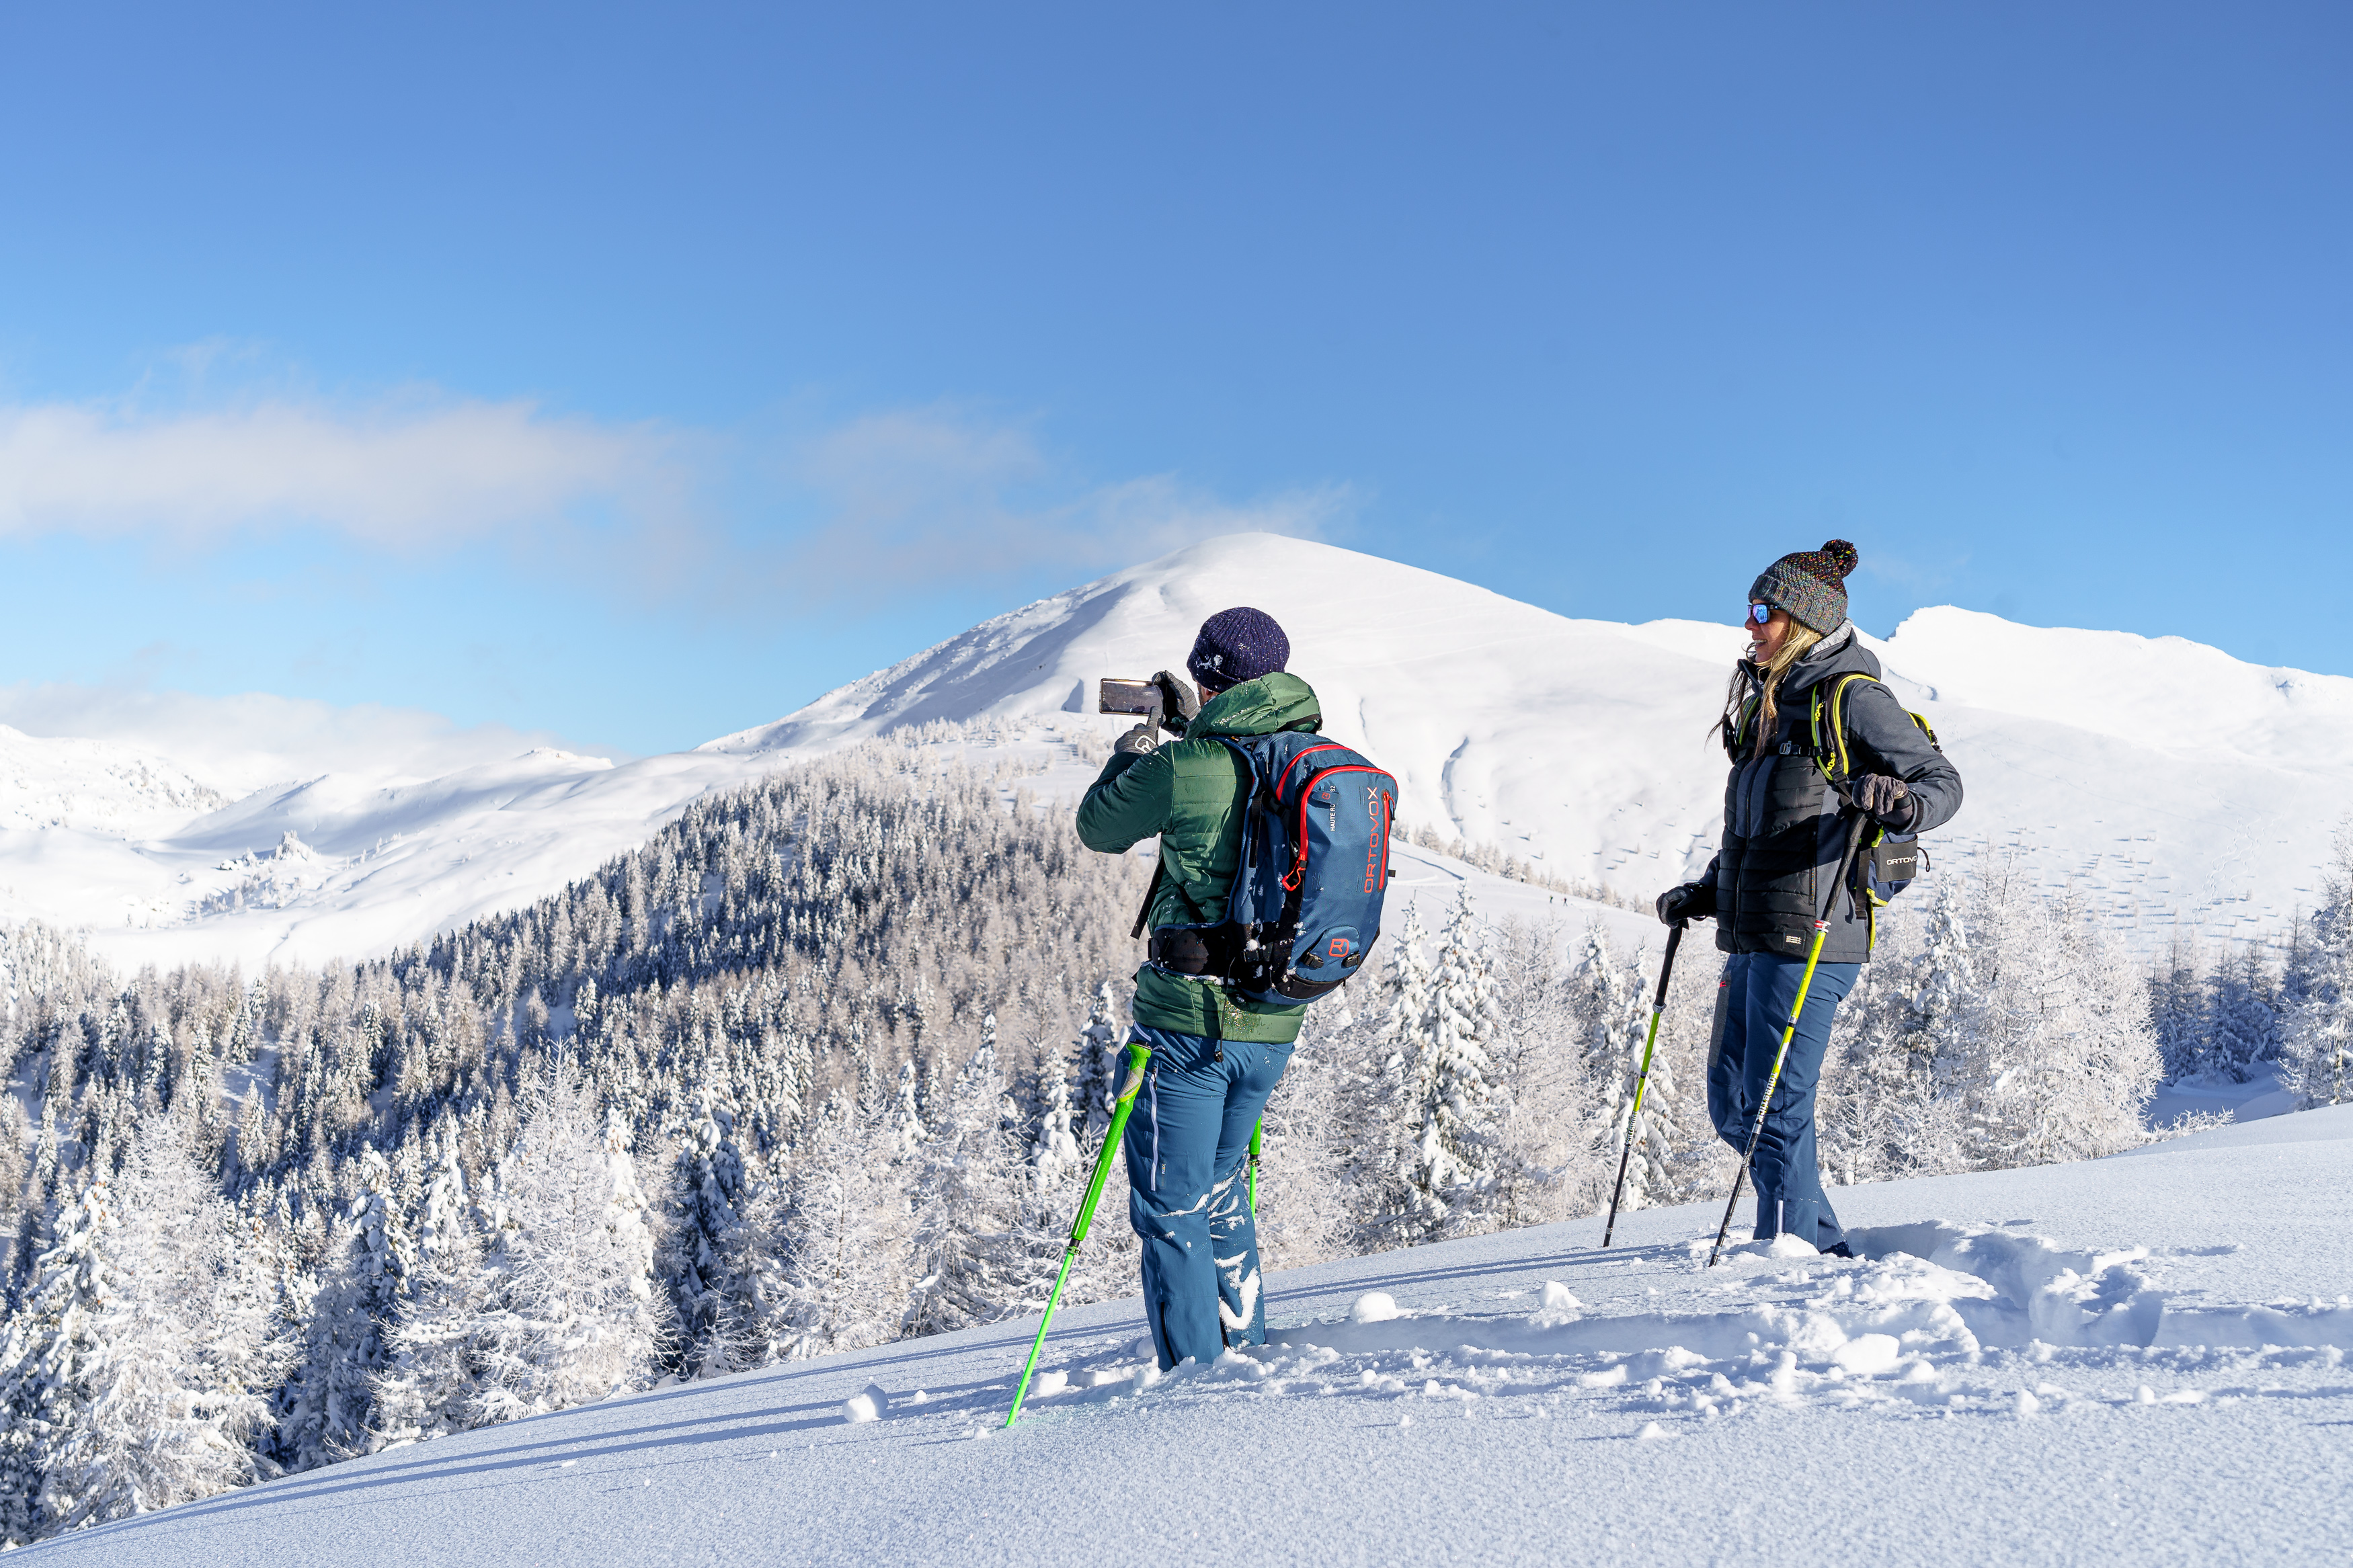 Two people are snowshoeing in deep snow and one person is taking a photo with the mobile phone of the snow-covered mountains that can be seen.